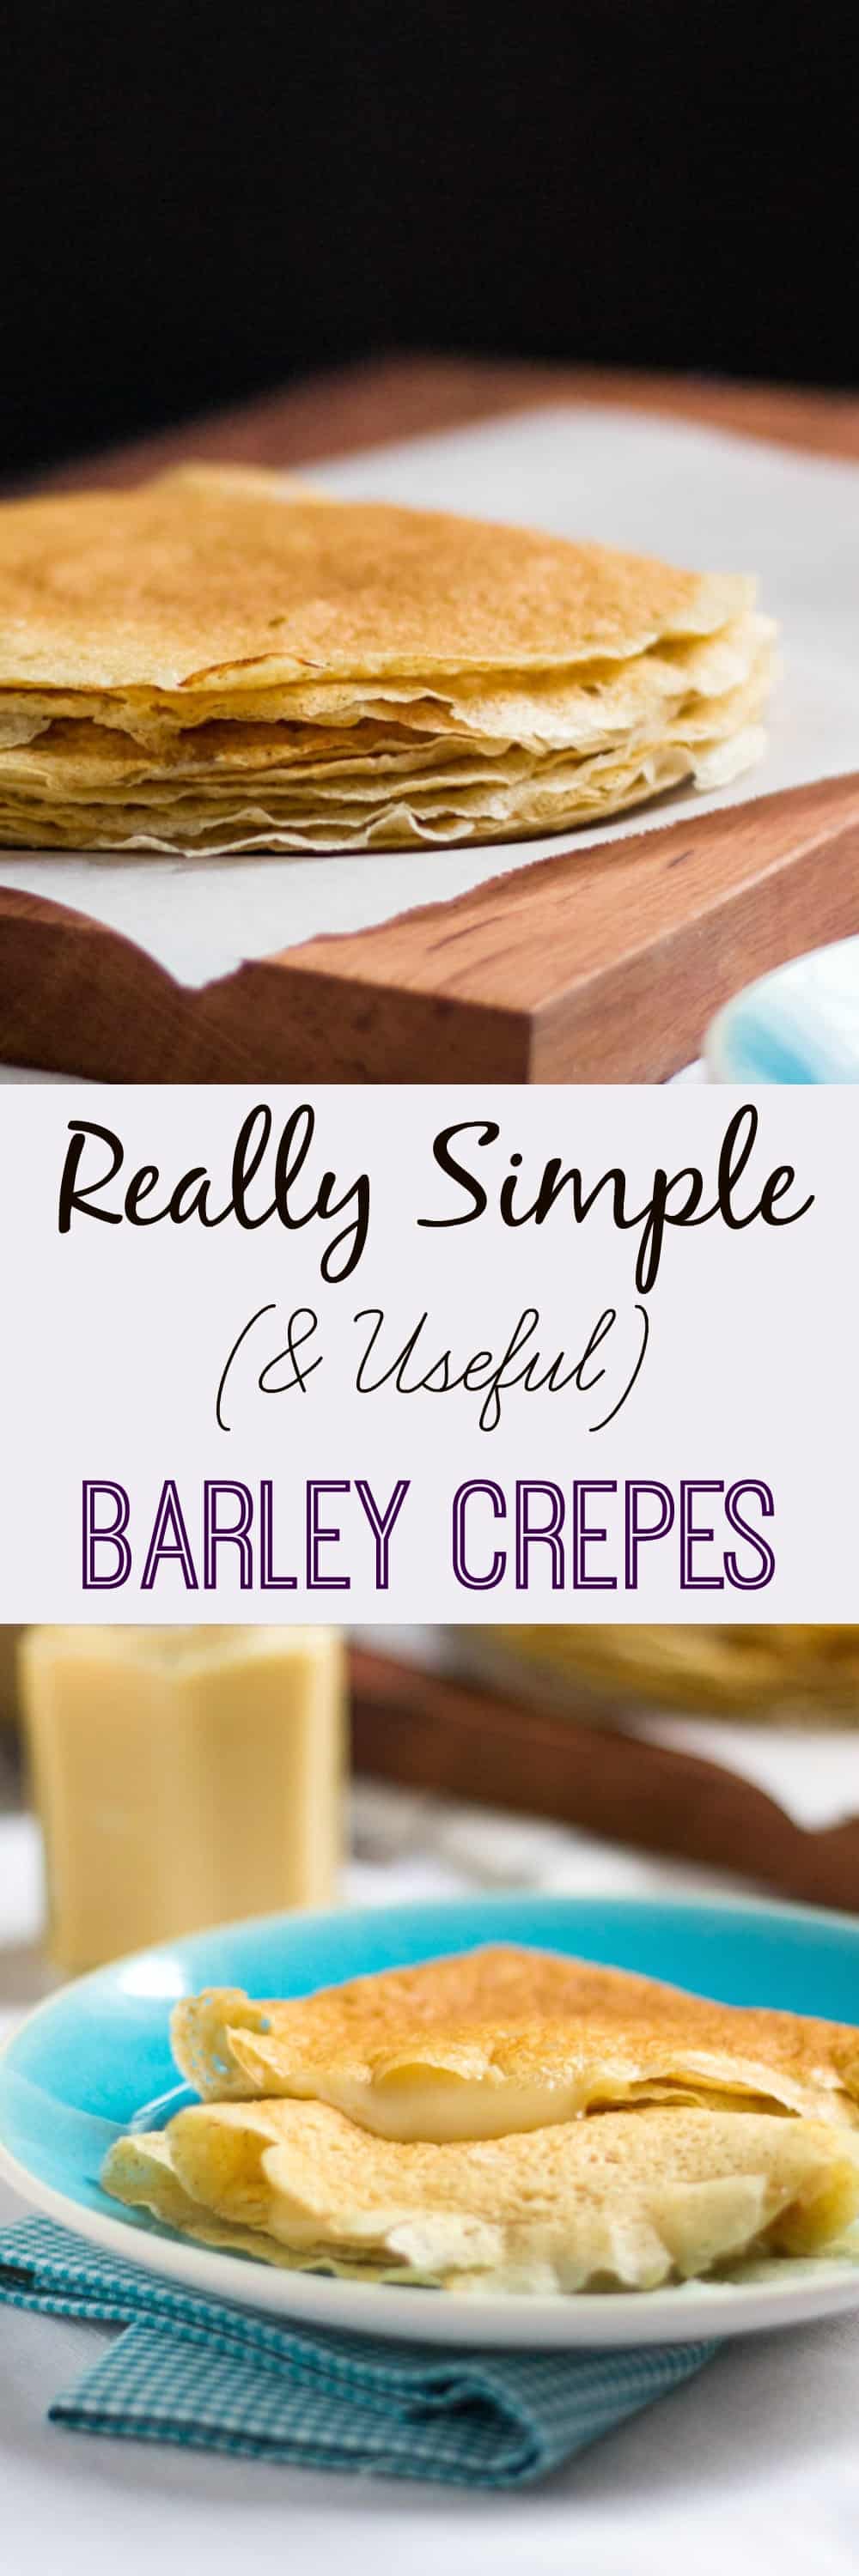 Really Simple (and Useful) Barley Crepes.  Handy to have in the freezer for emergency dinners or a speedy dessert.